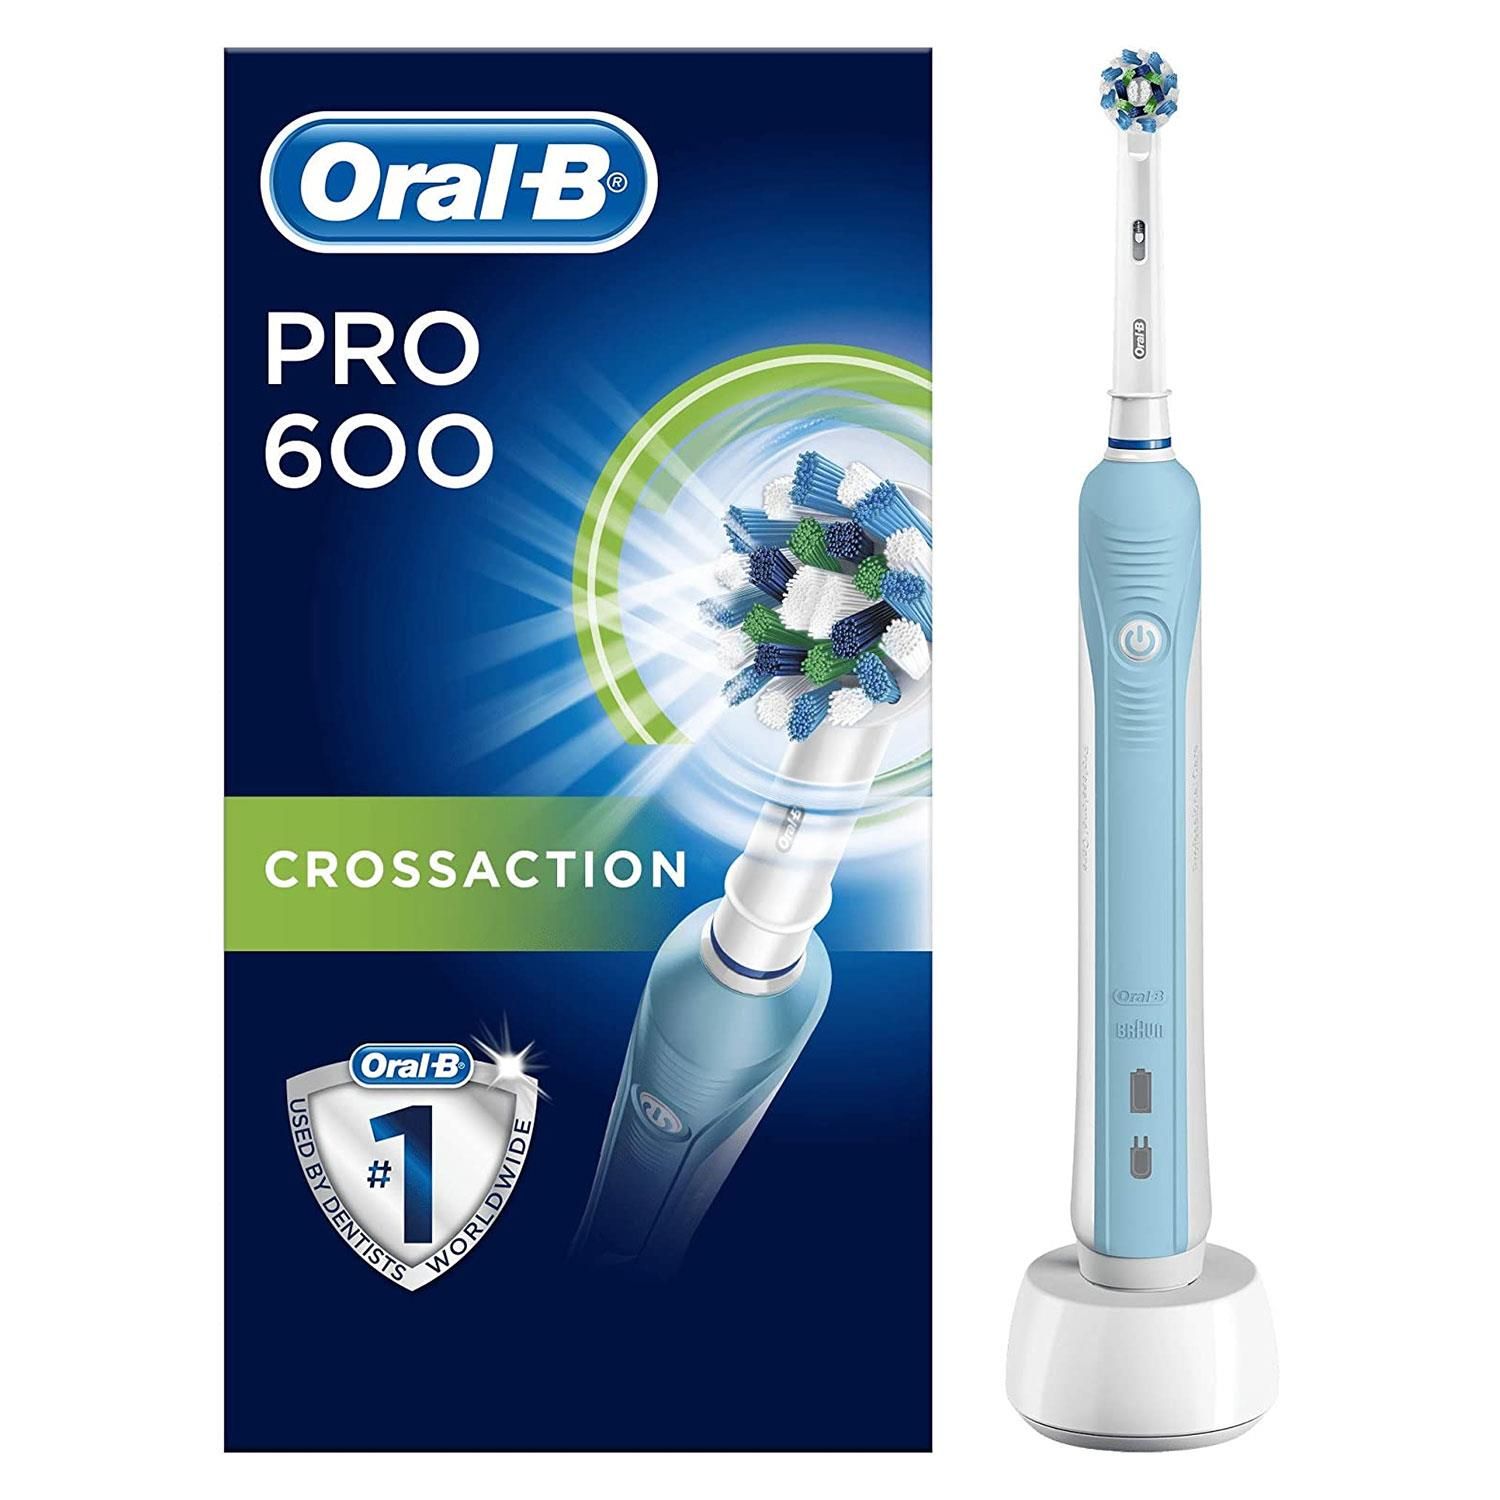 Oral-B Pro 600 Cross Action Electric Toothbrush Rechargeable.  Rechargeable brush with one mode and one brush head - 3D cleaning, ships with 2 pin plug. The Oral-B Pro 600 cross action electric rechargeable toothbrush provides a clinically proven clean versus a regular manual toothbrush. The professionally inspired design of the cross action toothbrush head surrounds each tooth with bristles angled at 16 degrees and 3D cleaning action oscillates, rotates and pulsates to break up and remove up to 100 Percent more plaque than a regular manual toothbrush. An in-handle timer helps you brush for a dentist-recommended 2 minutes. Best of all it is brought to you by Oral-B – the #1 brand used by dentists worldwide. Oral-B Pro 600 electric rechargeable toothbrush is compatible with the following replacement toothbrush heads: Cross Action, 3D White, Sensi Ultrathin, Sensitive Clean, Precision Clean, Floss Action, Tri Zone, Dual Clean, Power Tip, Ortho Care.

Features:

Up to 100% more plaque removal: Round head cleans better for healthier gums
Movement helps you achieve enhanced cleaning results
Dentist-inspired round brush head oscillates, rotates and pulsates to break up and remove plaque
One brushing mode: Daily clean
Content: One electric toothbrush handle with charger two-pin UK plug, one toothbrush head; Oral-B, the #1 brand used by dentists worldwide

The Box Contain: 1x electric toothbrush handle with charger two-pin UK plug, 1x toothbrush head